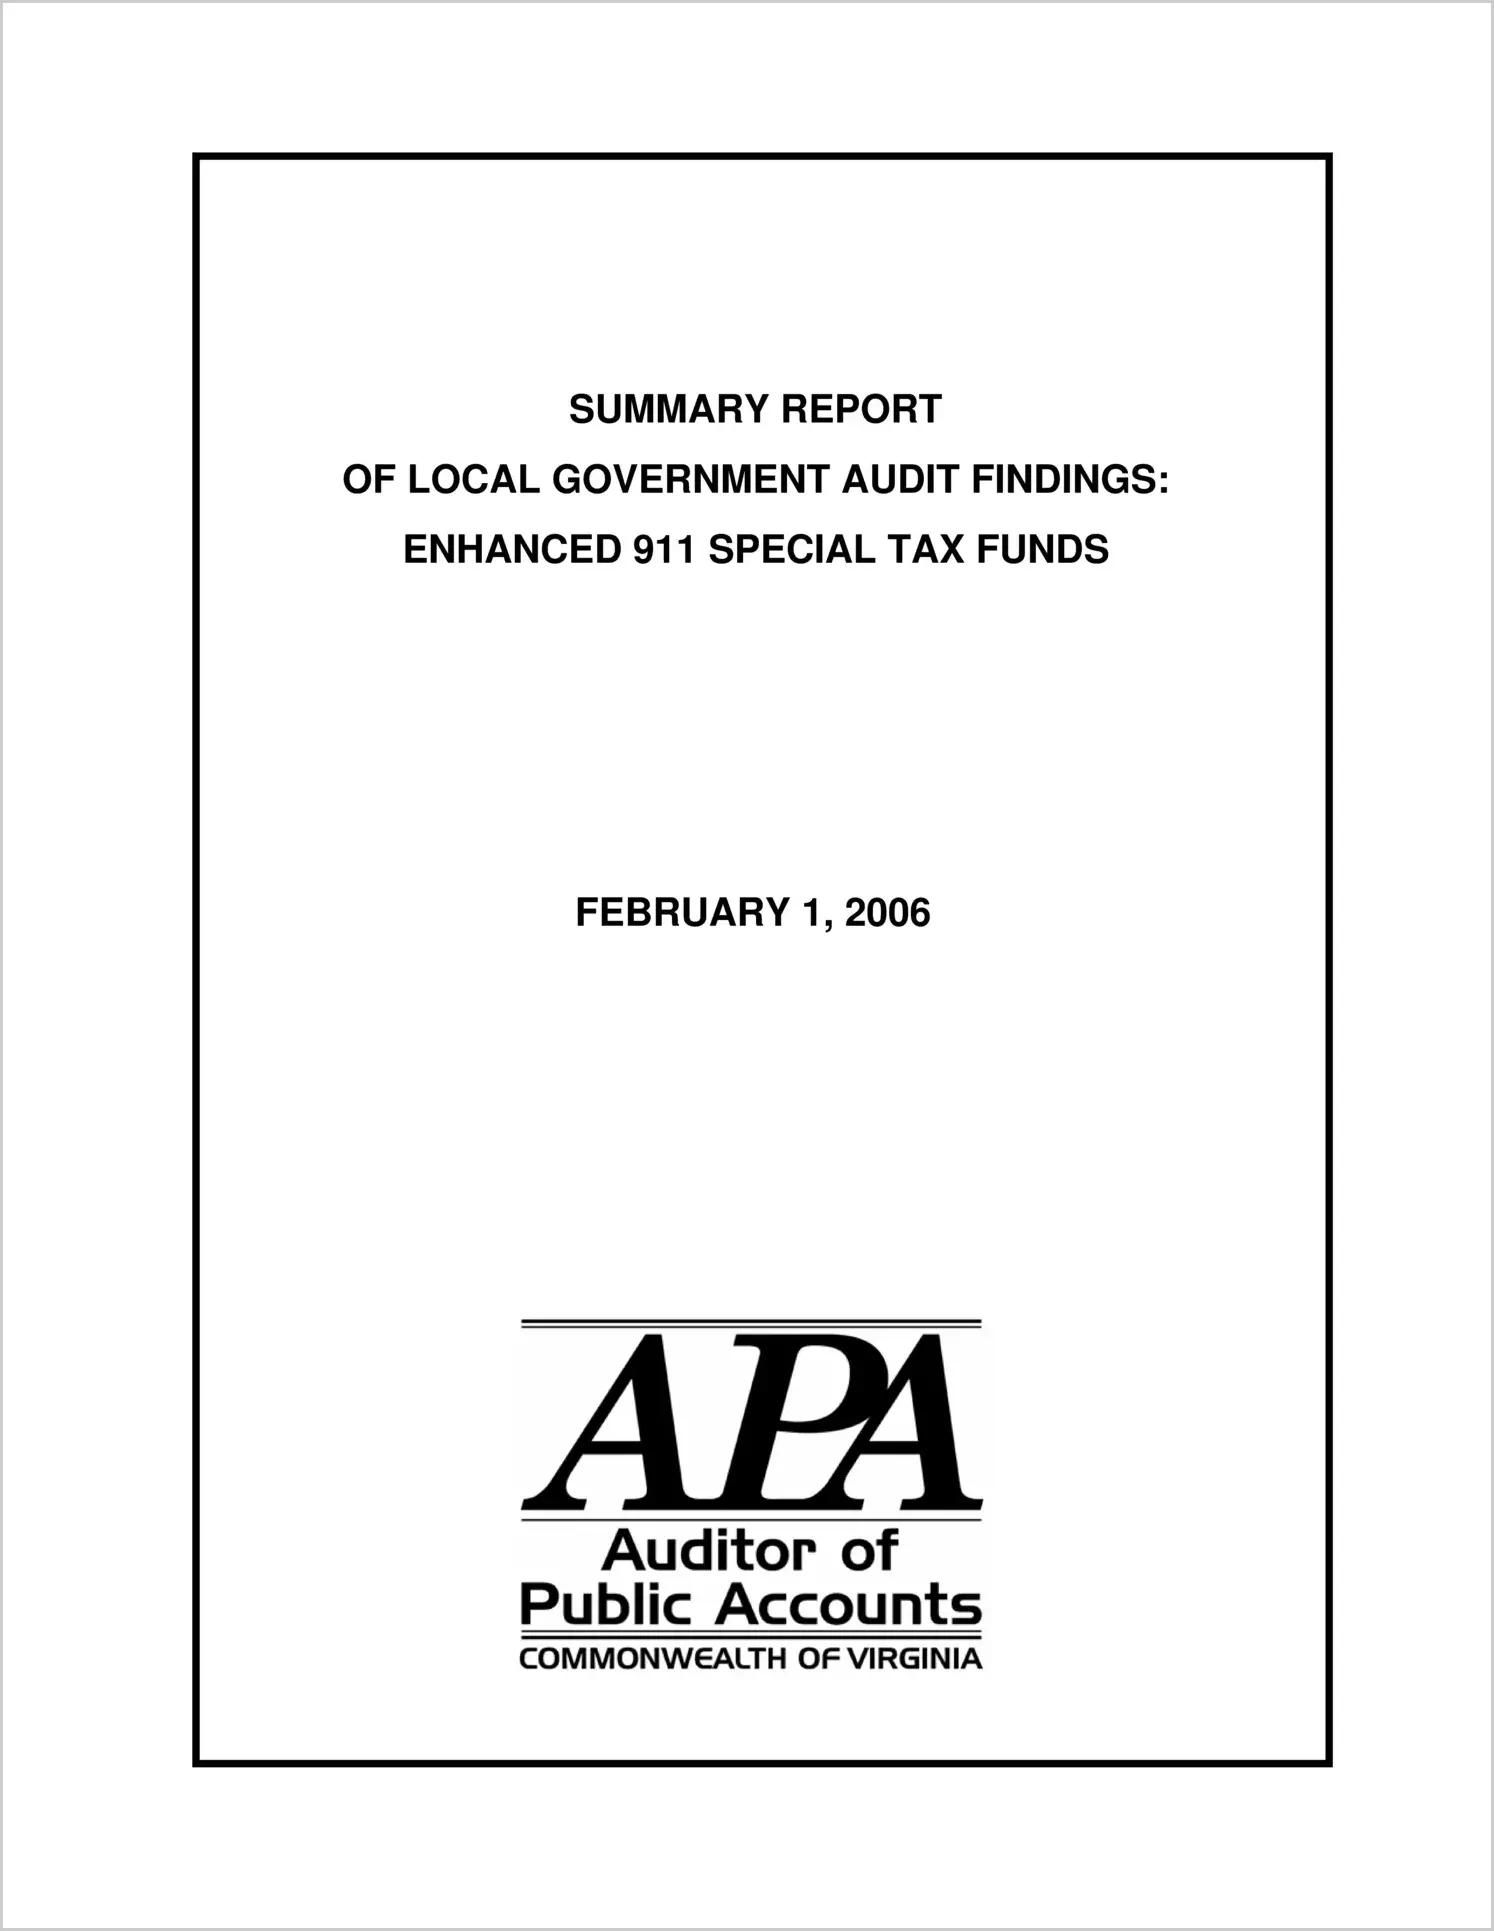 Summary Report of Local Government Audit Findings: Enhanced 911 Special Tax Funds (Report Date: 2/1/2006)